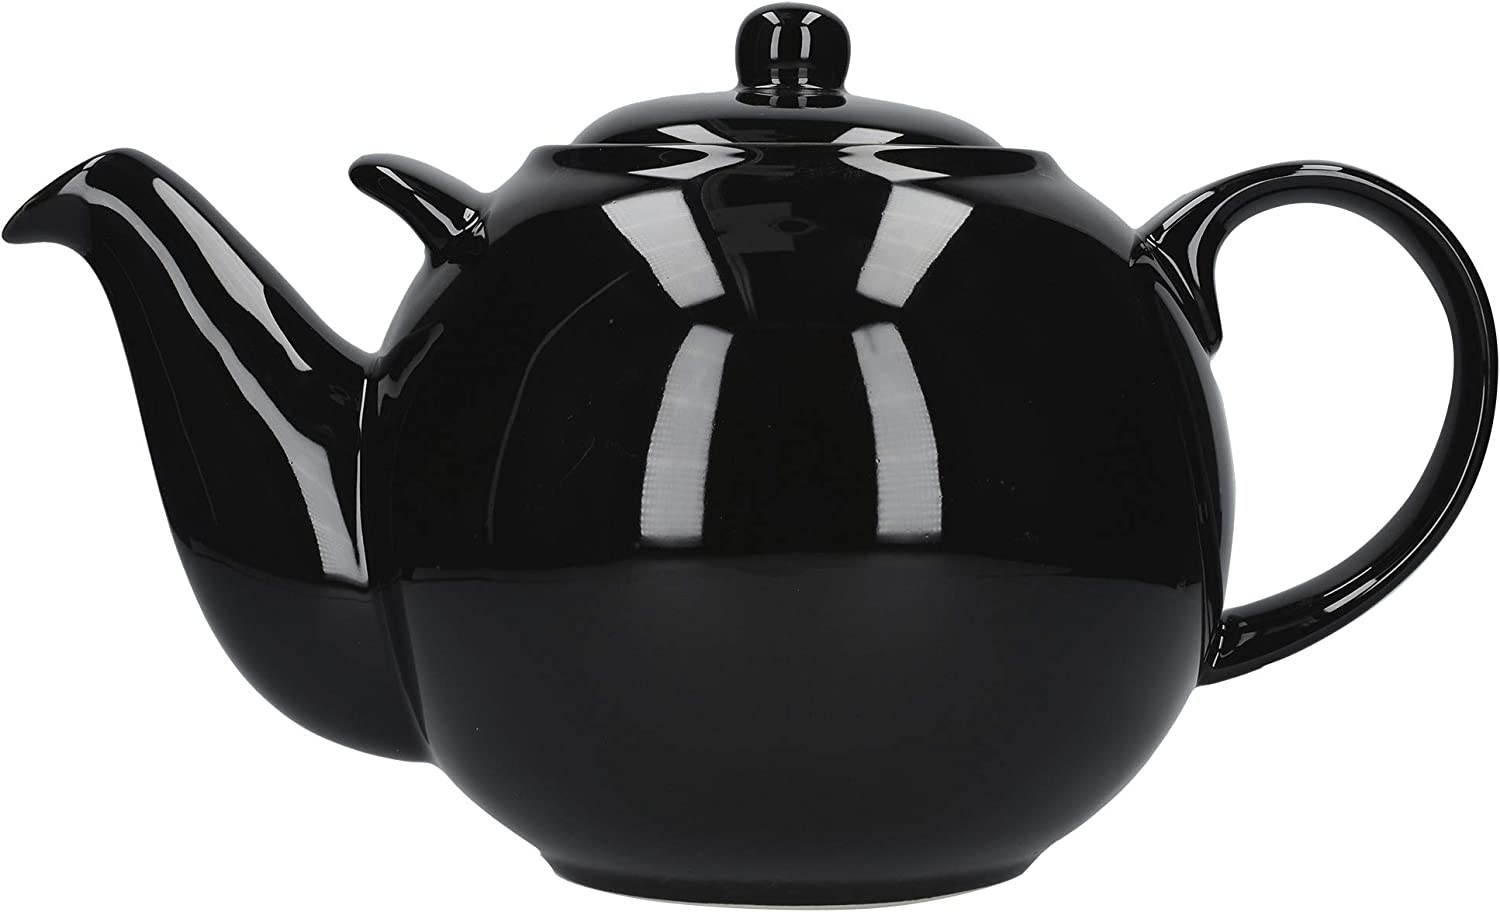 London Pottery Globe Extra Large Black Ceramic Teapot with Strainer - 10 Cups (3 Litre)